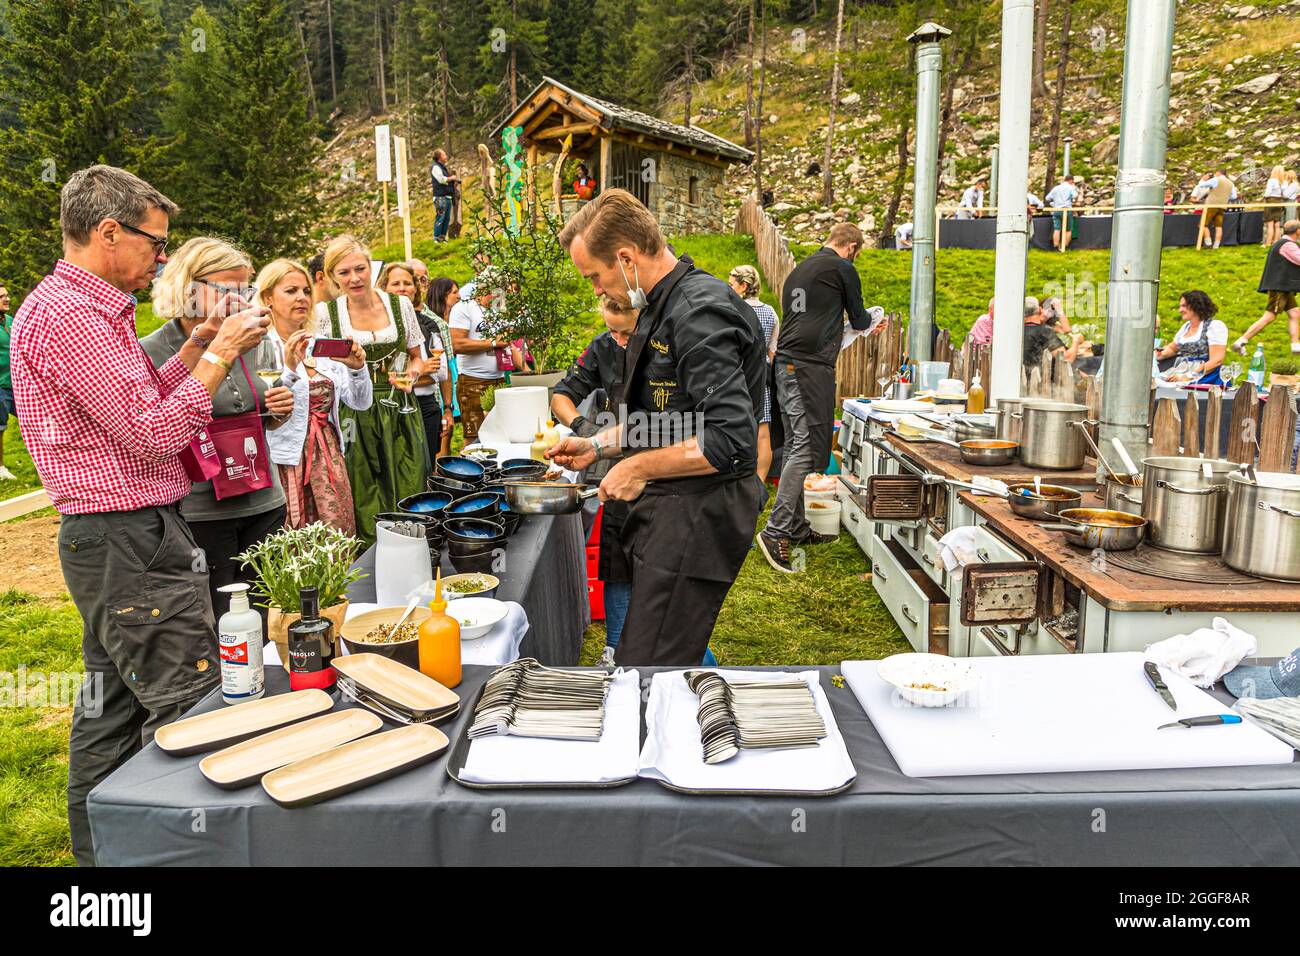 Unplugged Taste is the name of the gourmet event at the Gompm-Alm in South Tyrol, Italy. It takes place every year on the last Sunday in August. Famous chefs prepare their dishes on old wood stoves. Stock Photo